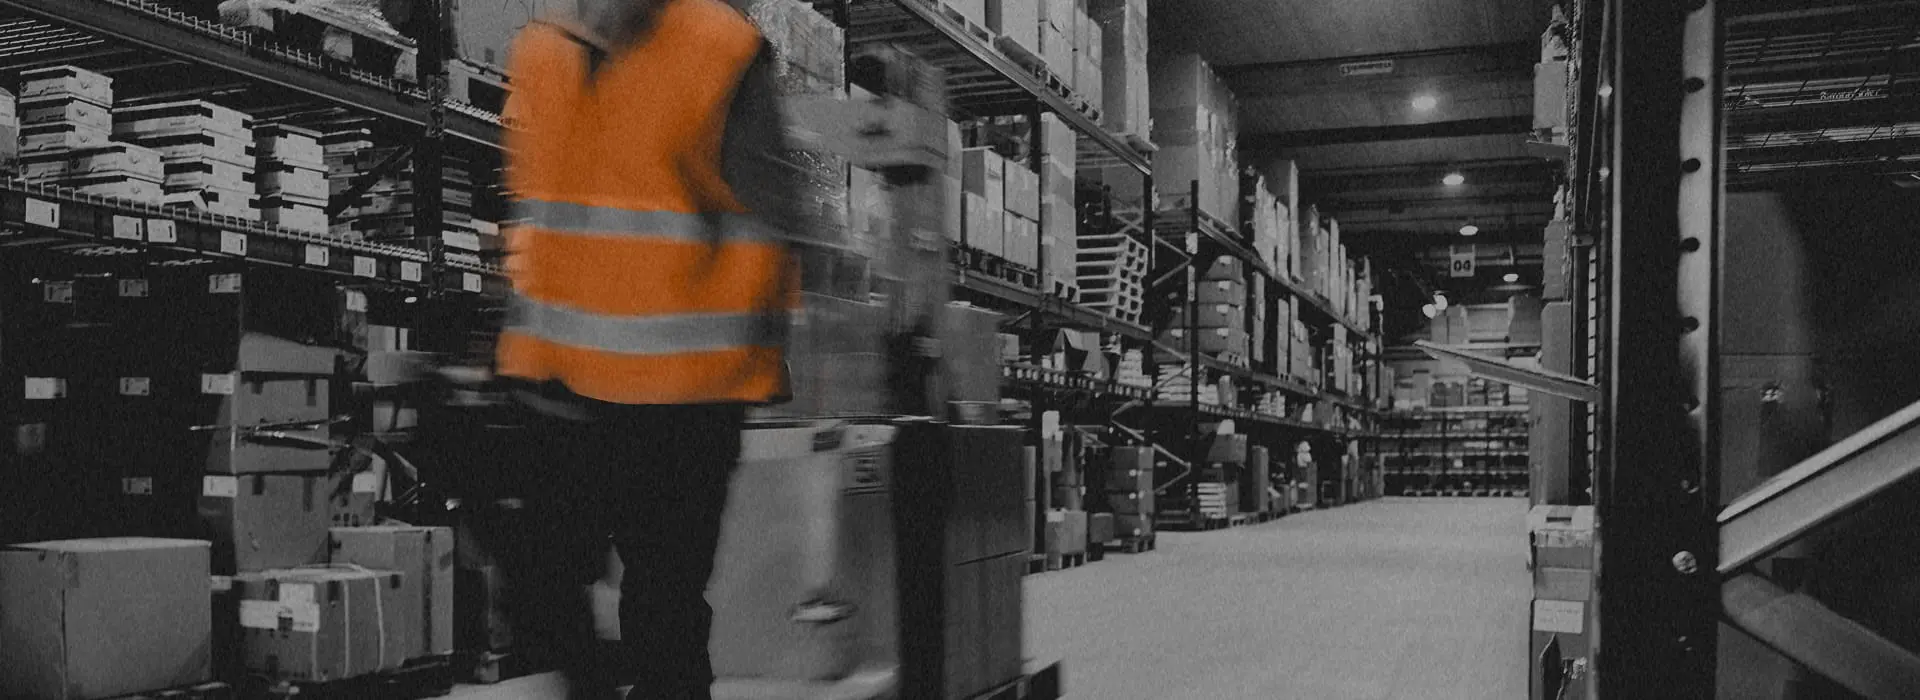 A low-color photograph of a person in protective gear moving items through a warehouse